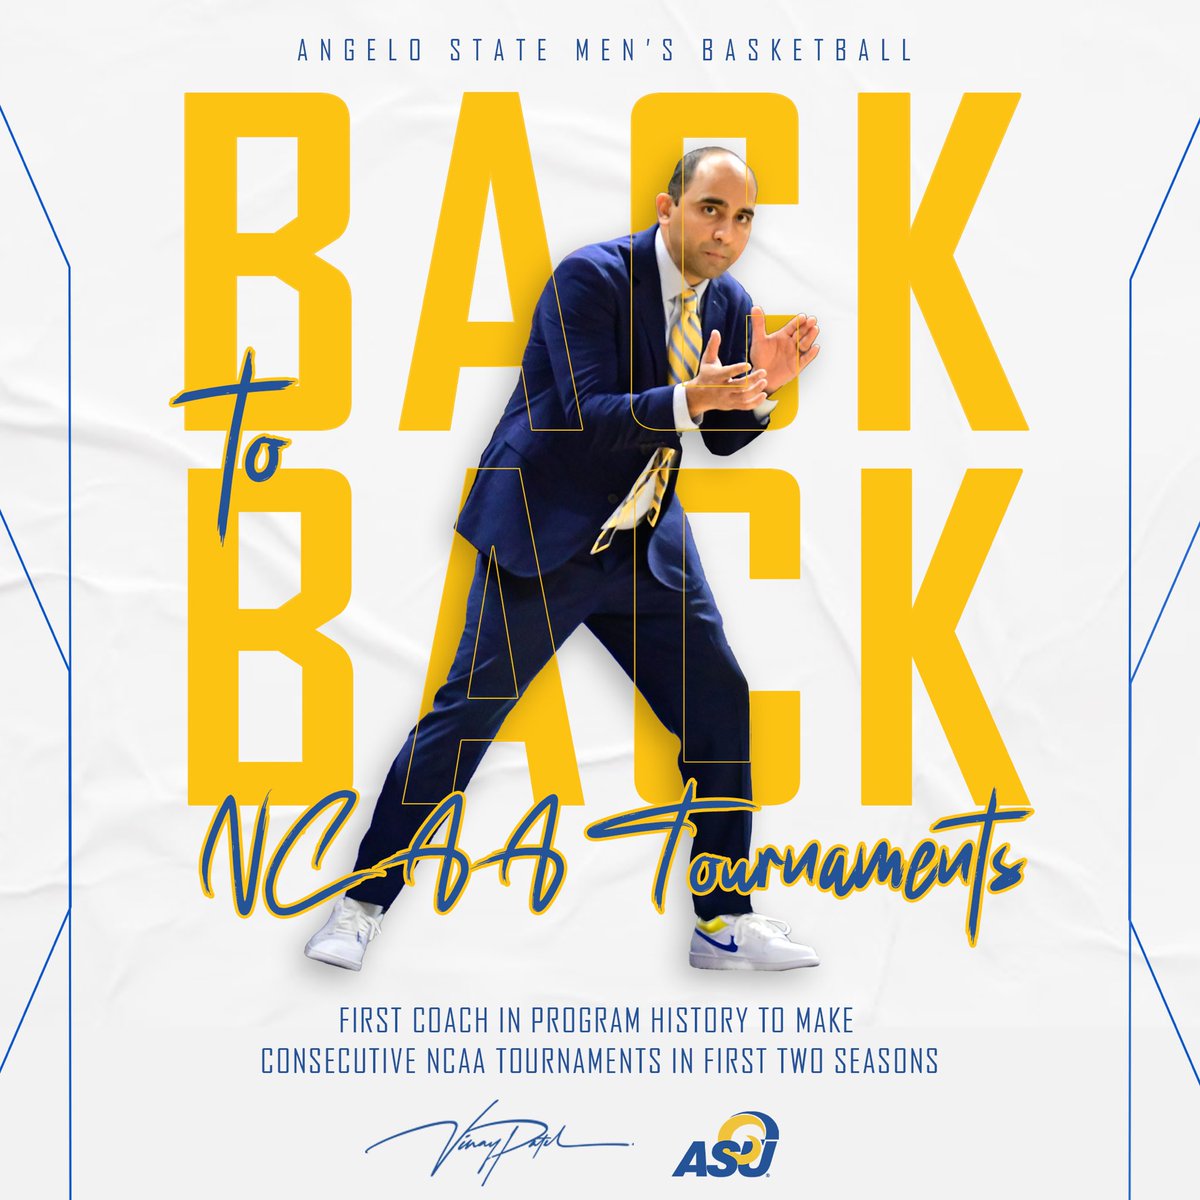 𝐁𝐀𝐂𝐊 to 𝐁𝐀𝐂𝐊 First Coach in program history to make consecutive NCAA tournaments in first two seasons. @coachvinaypatel #RamHoops | #RamFam